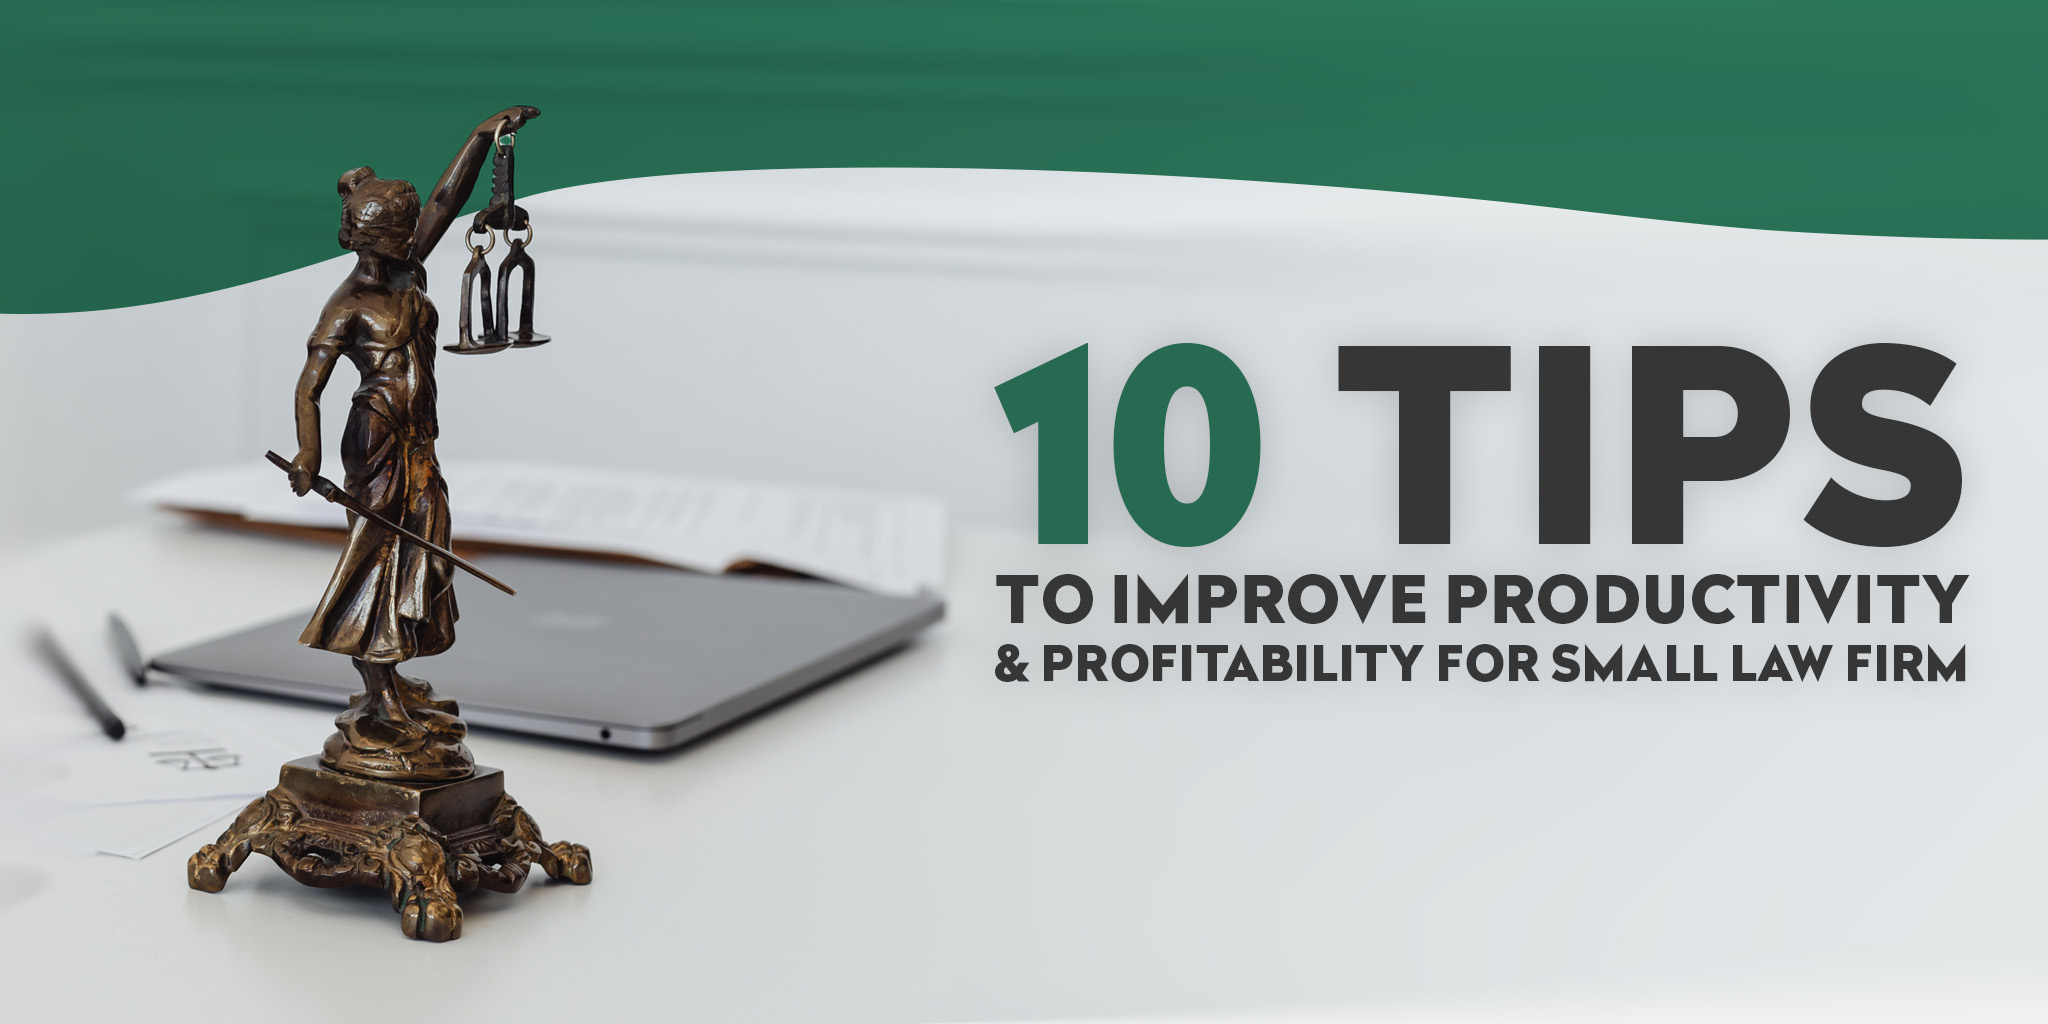 Tips to Improve Productivity & Profitability In A Small Law Firm